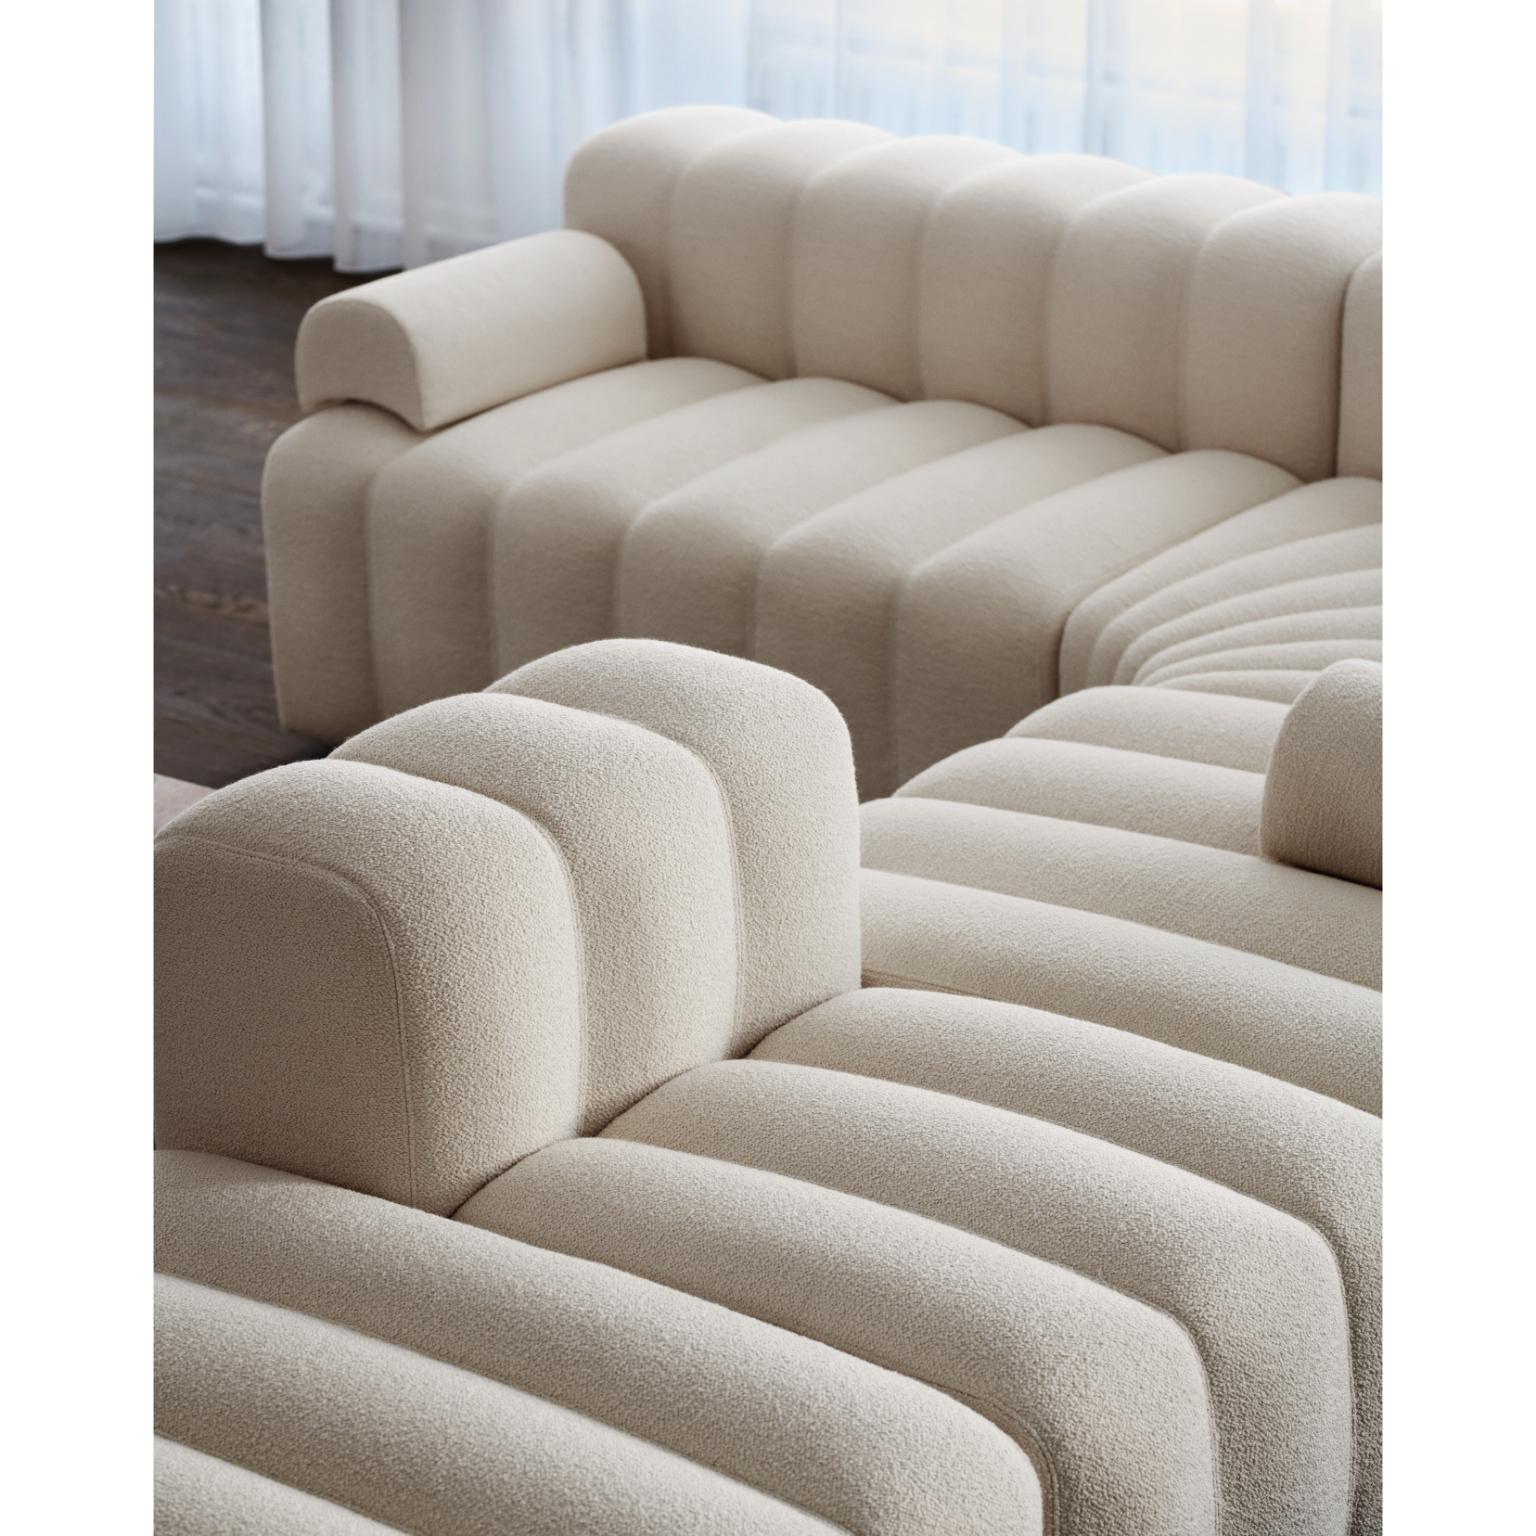 Studio Classic Ottoman by NORR11
Dimensions: D 90 x W 80 x H 47 cm. SH 47 cm. 
Materials: Foam, wood and upholstery.
Upholstery: Barnum Boucle Color 3.
Weight: 25 kg.

Available in different upholstery options. A plywood structure with elastic belts